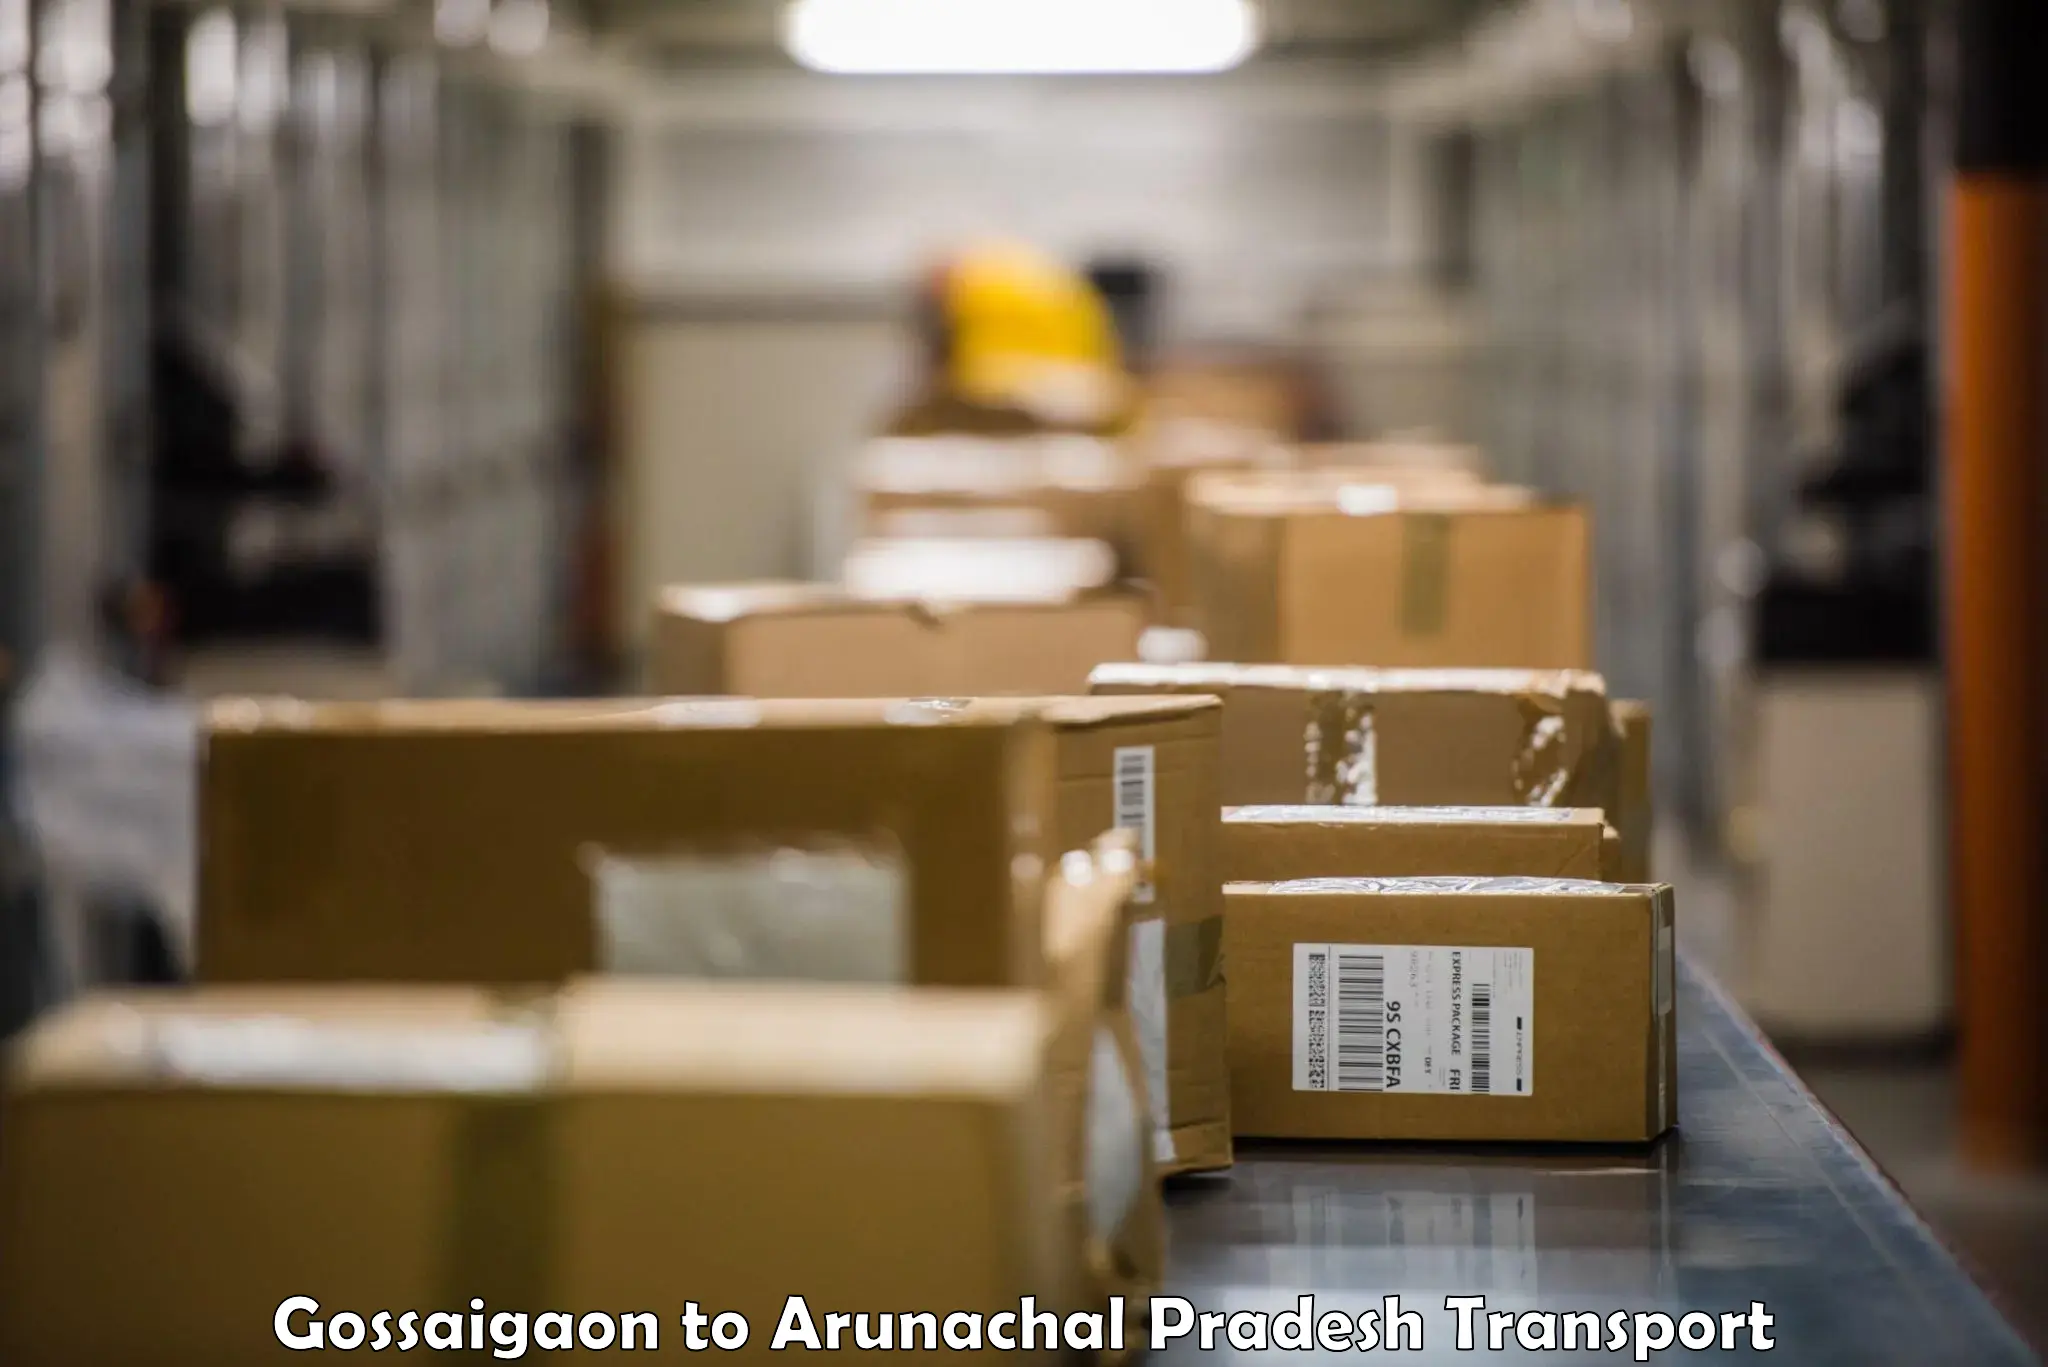 Air freight transport services Gossaigaon to Papum Pare